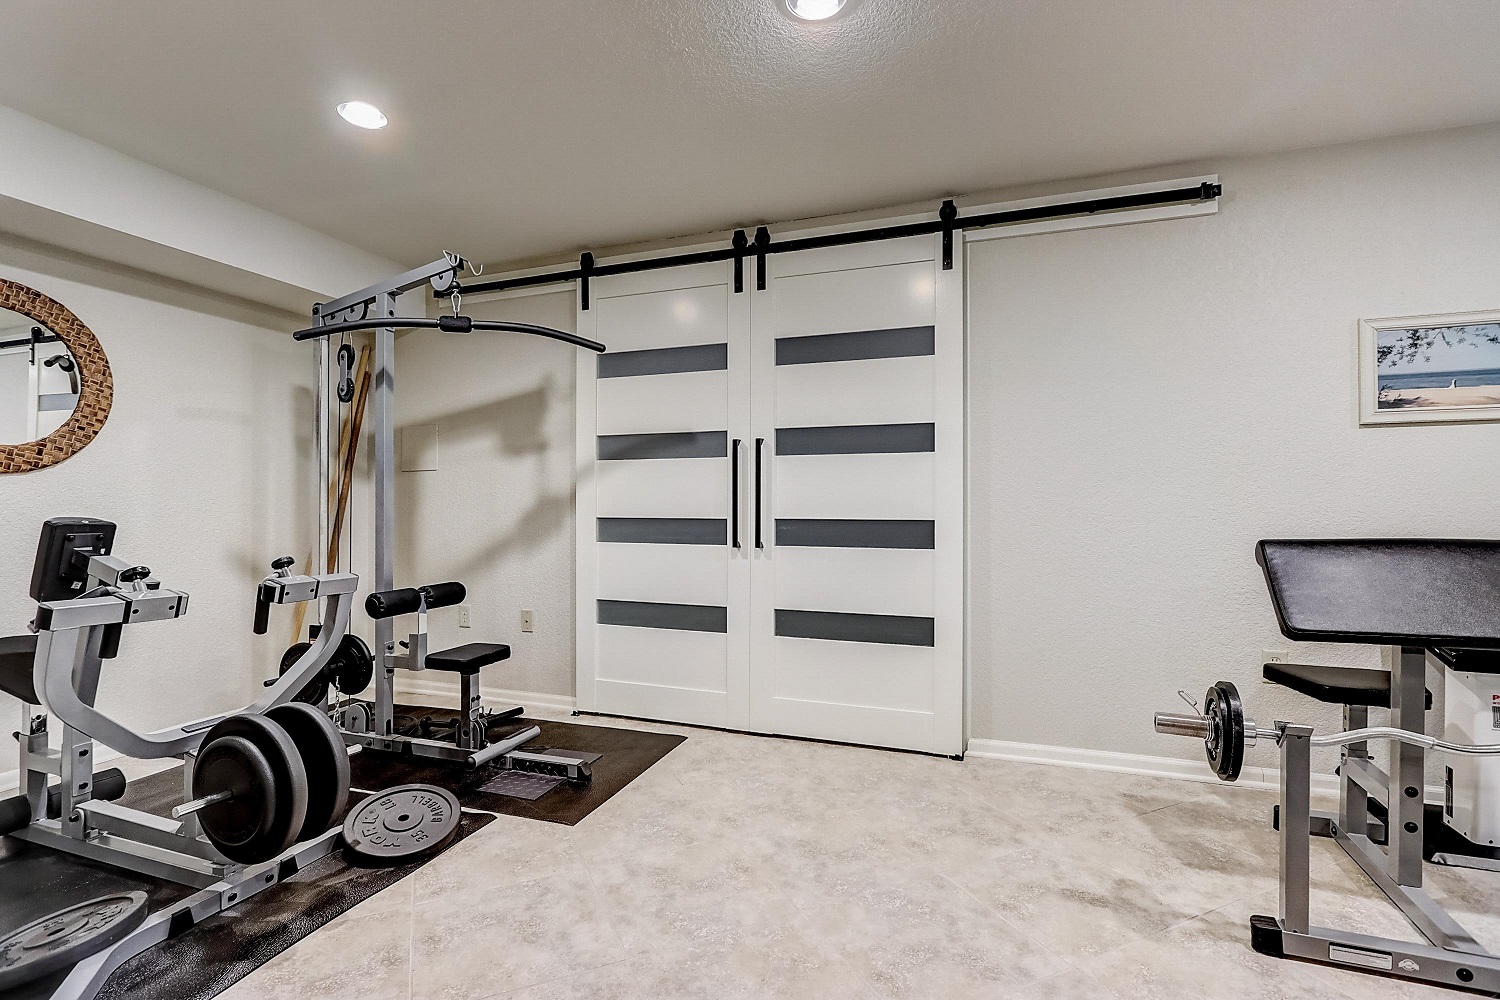 Wisconsin Fitness Room Remodel with Concrete Flooring